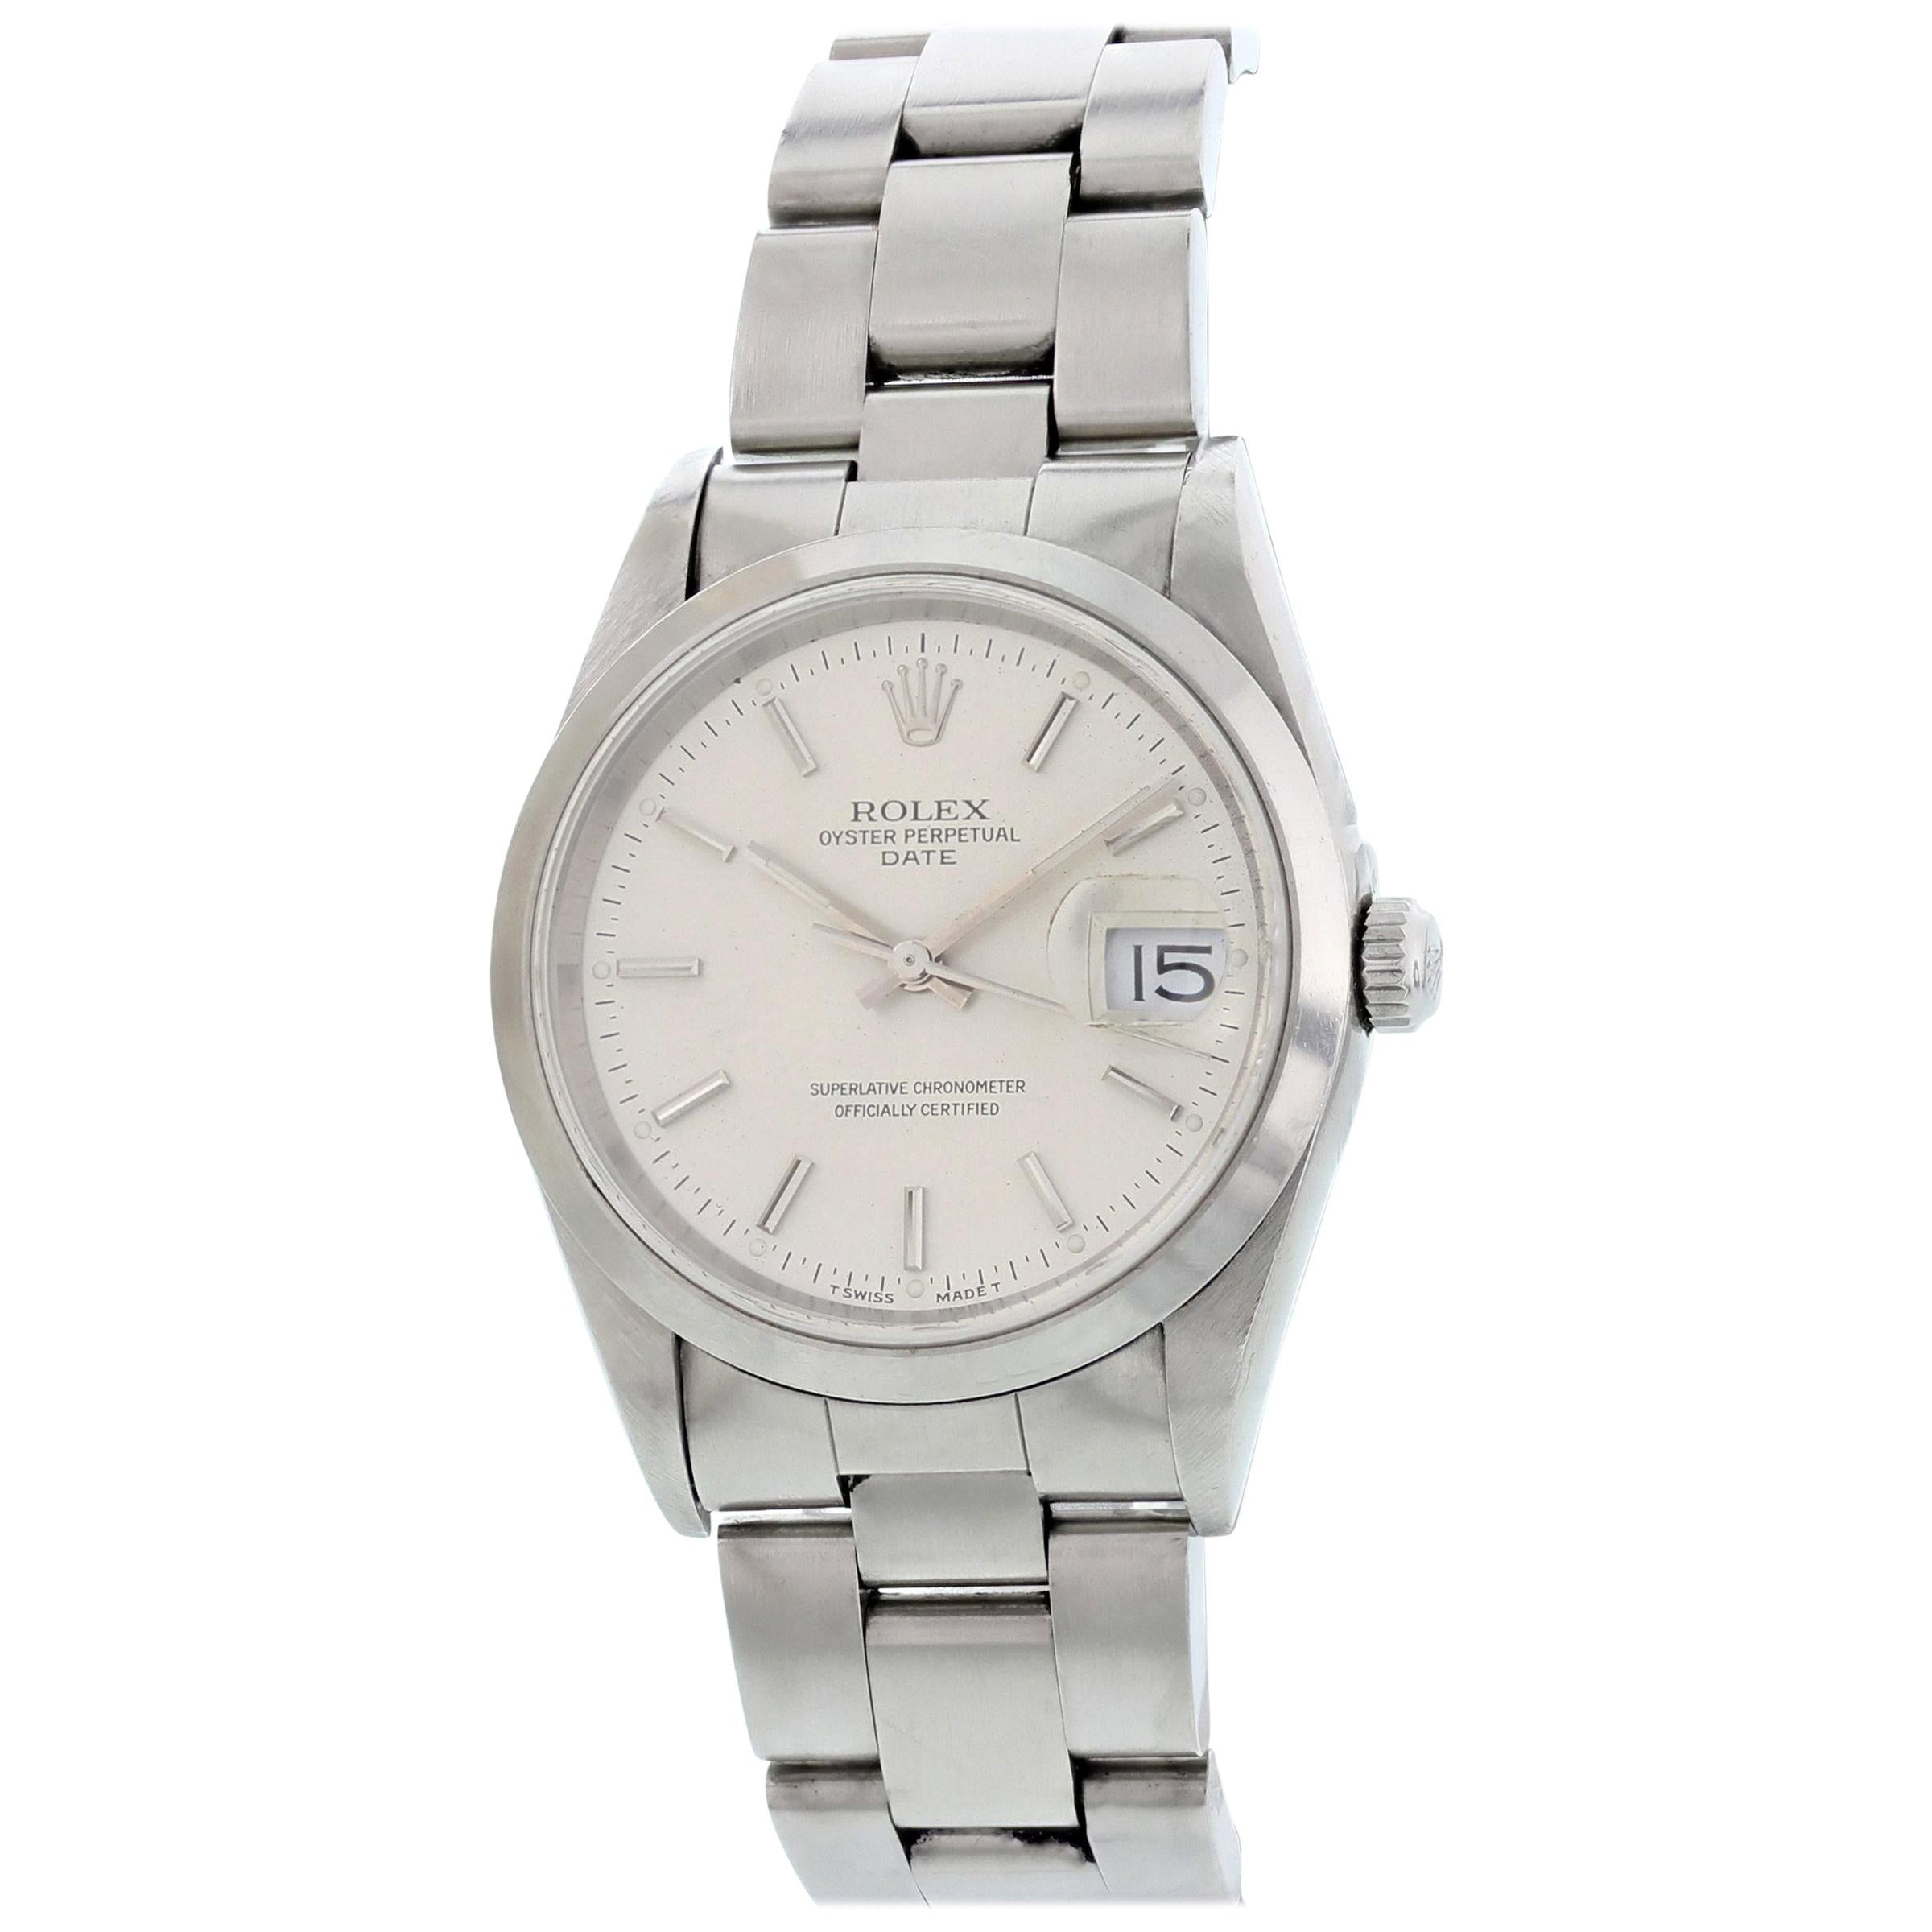 Rolex Oyster Perpetual Date 15200 Men's Watch Box Papers For Sale